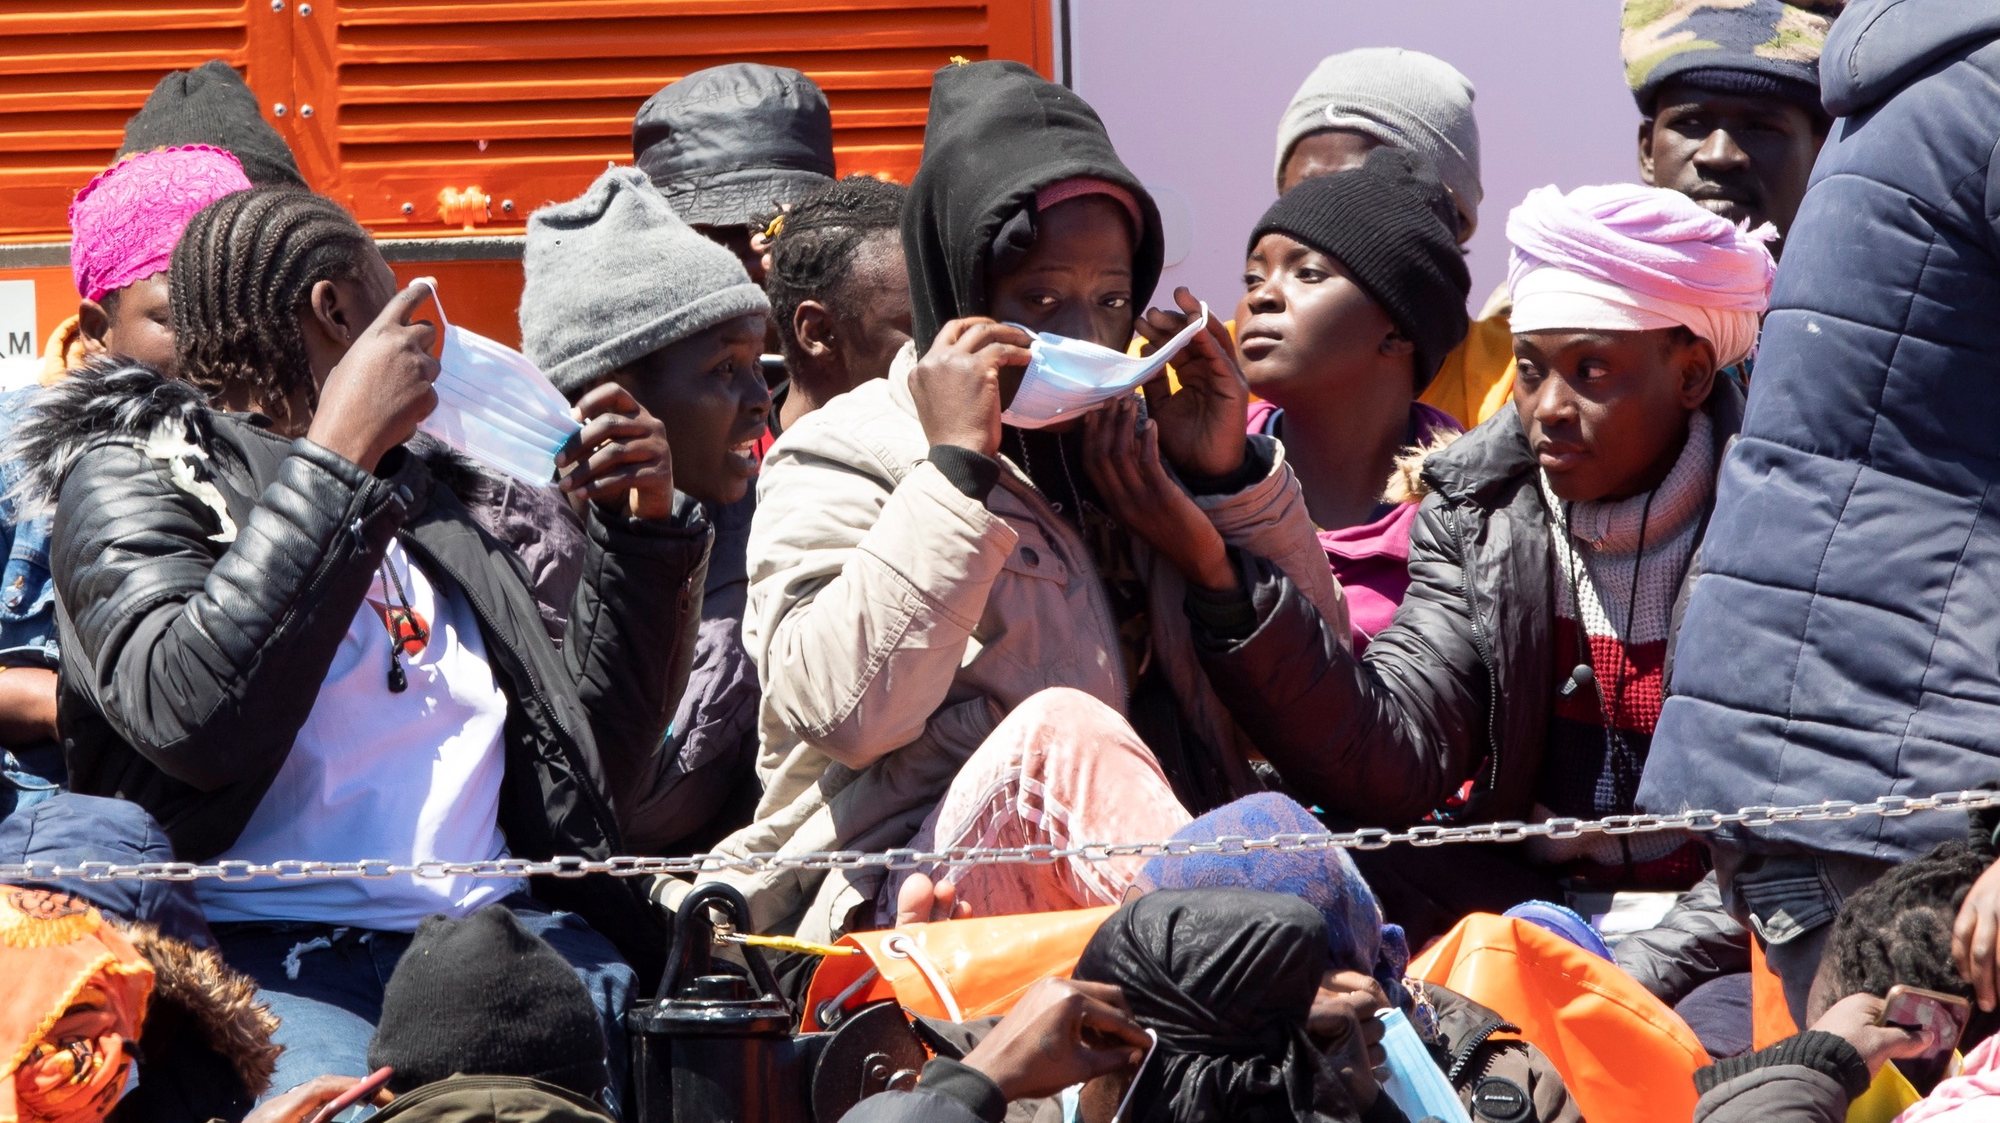 epa09168252 Some rescued migrants put on face masks upon arrival at the port of Arguineguin in Gran Canaria, Canary Islands, Spain, 29 April 2021. A total of 40 migrants were rescued by Spanish Sea Rescue Services while traveling on a small boat at sea.  EPA/QUIQUE CURBELO